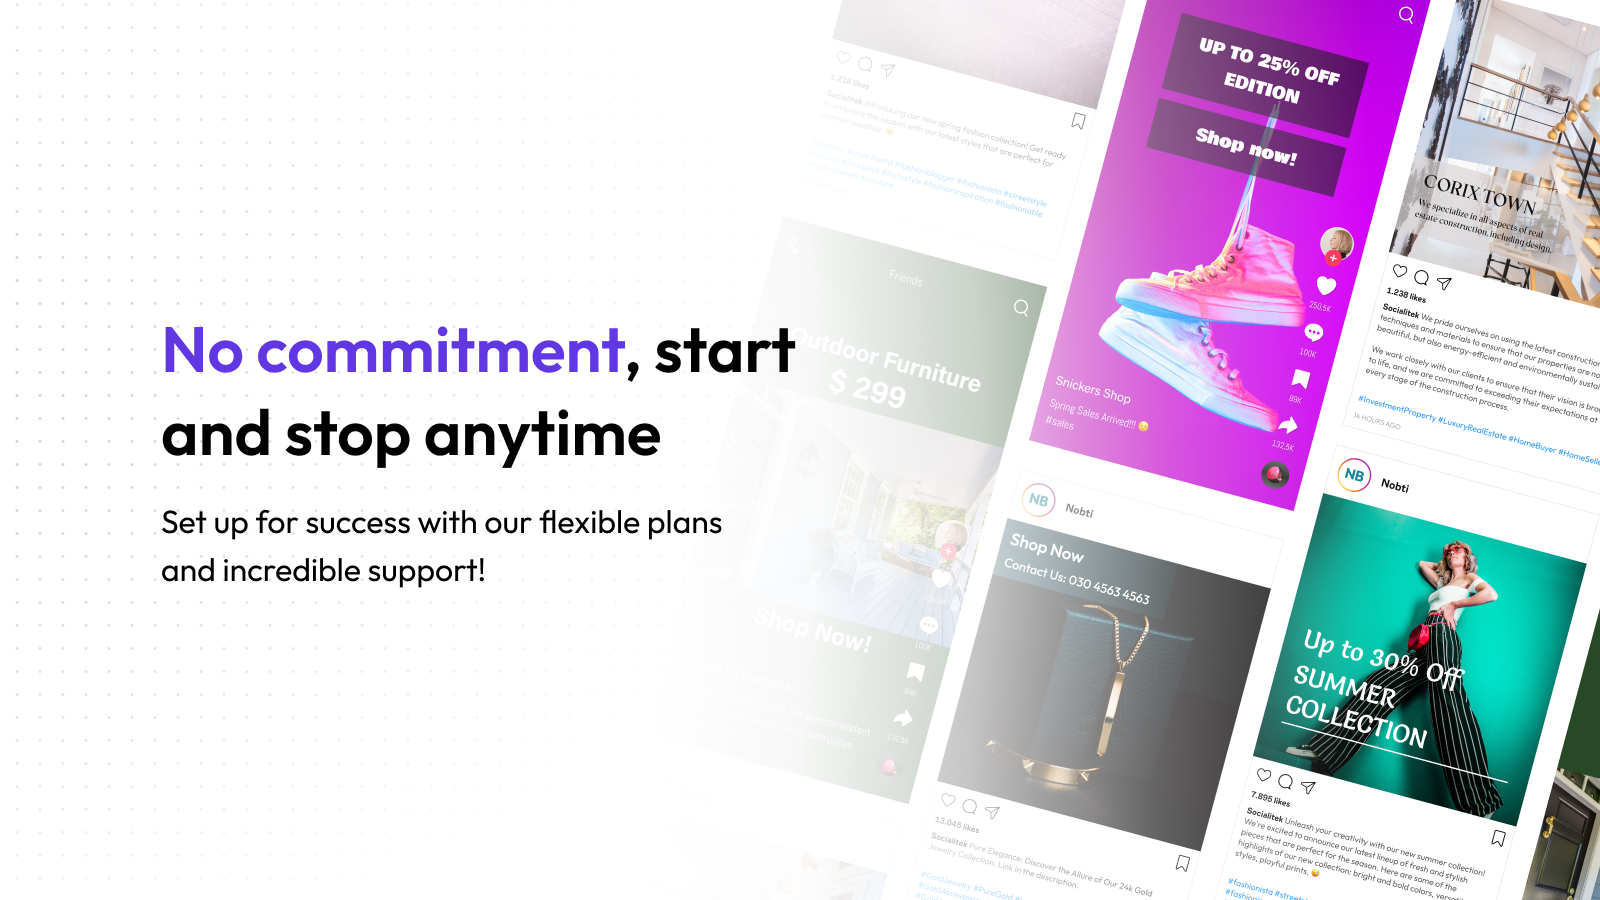 No commitment on social media growth, grow social effortlessly